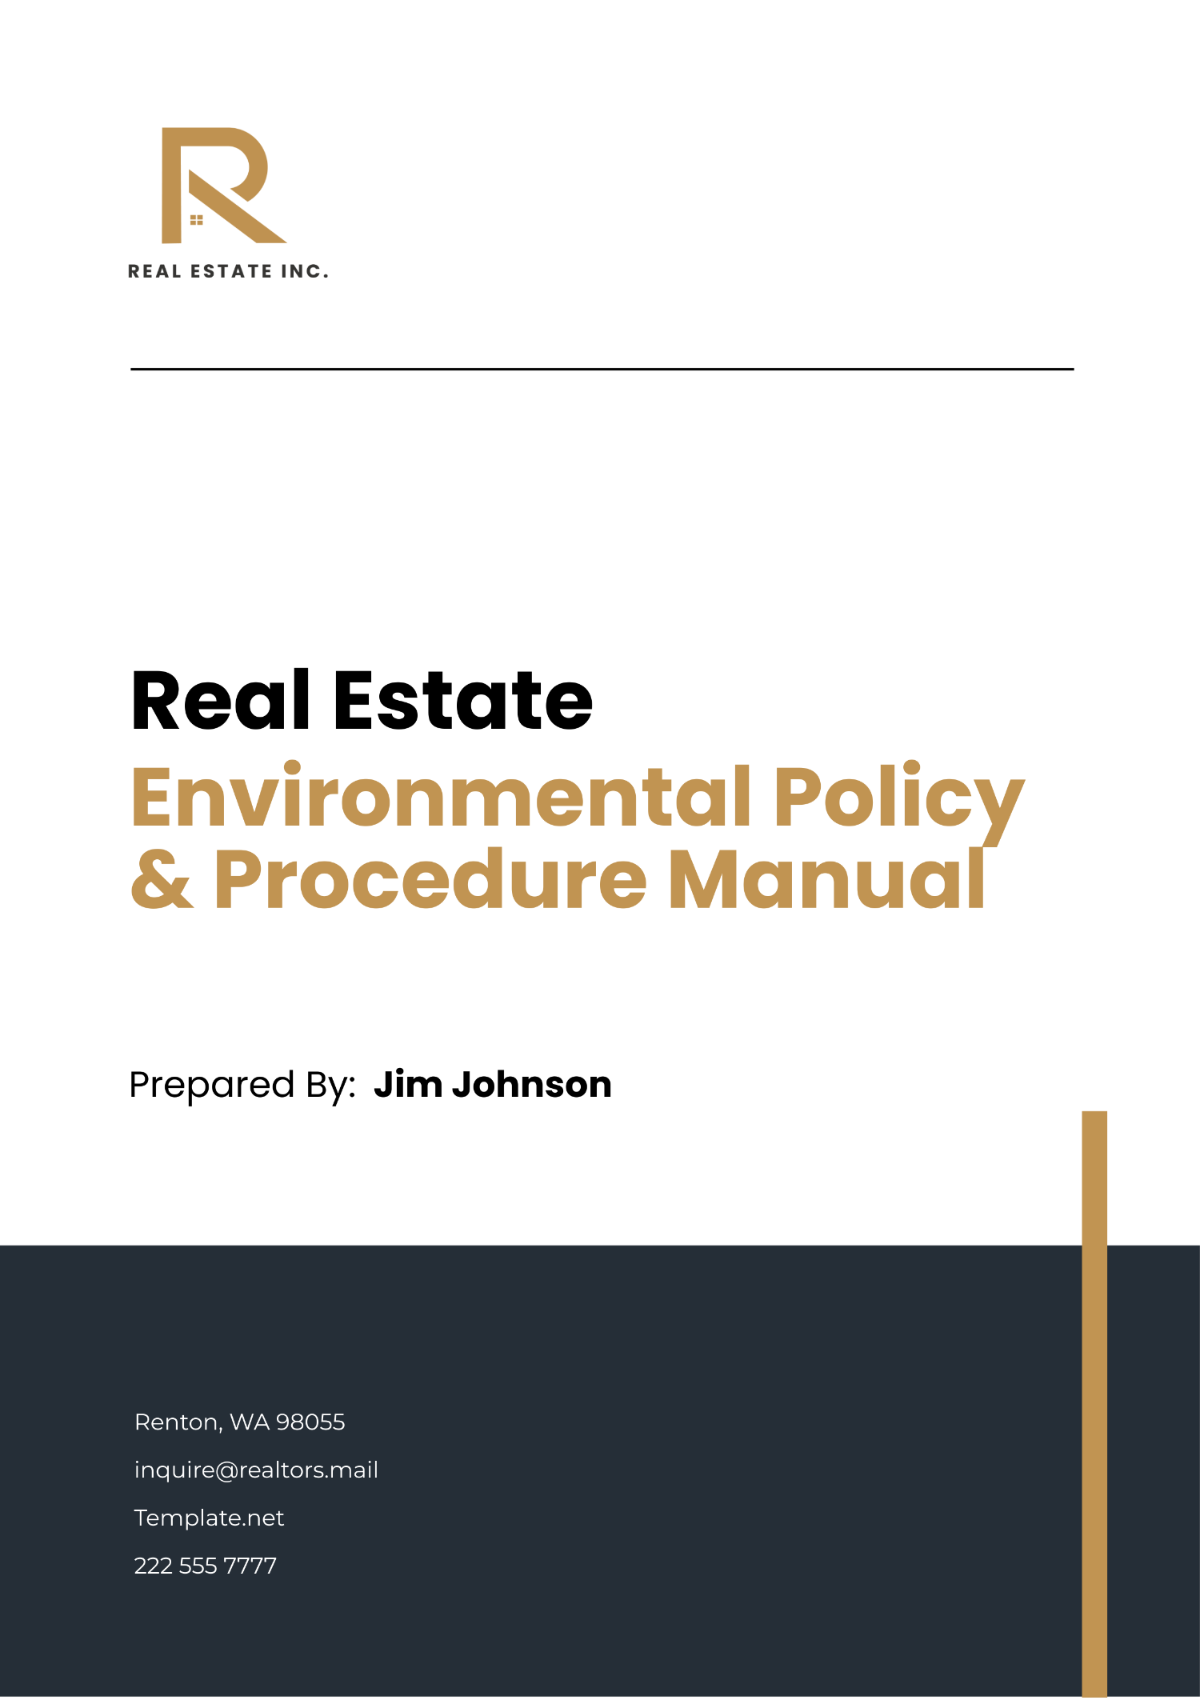 Free Real Estate Environmental Policy & Procedure Manual Template